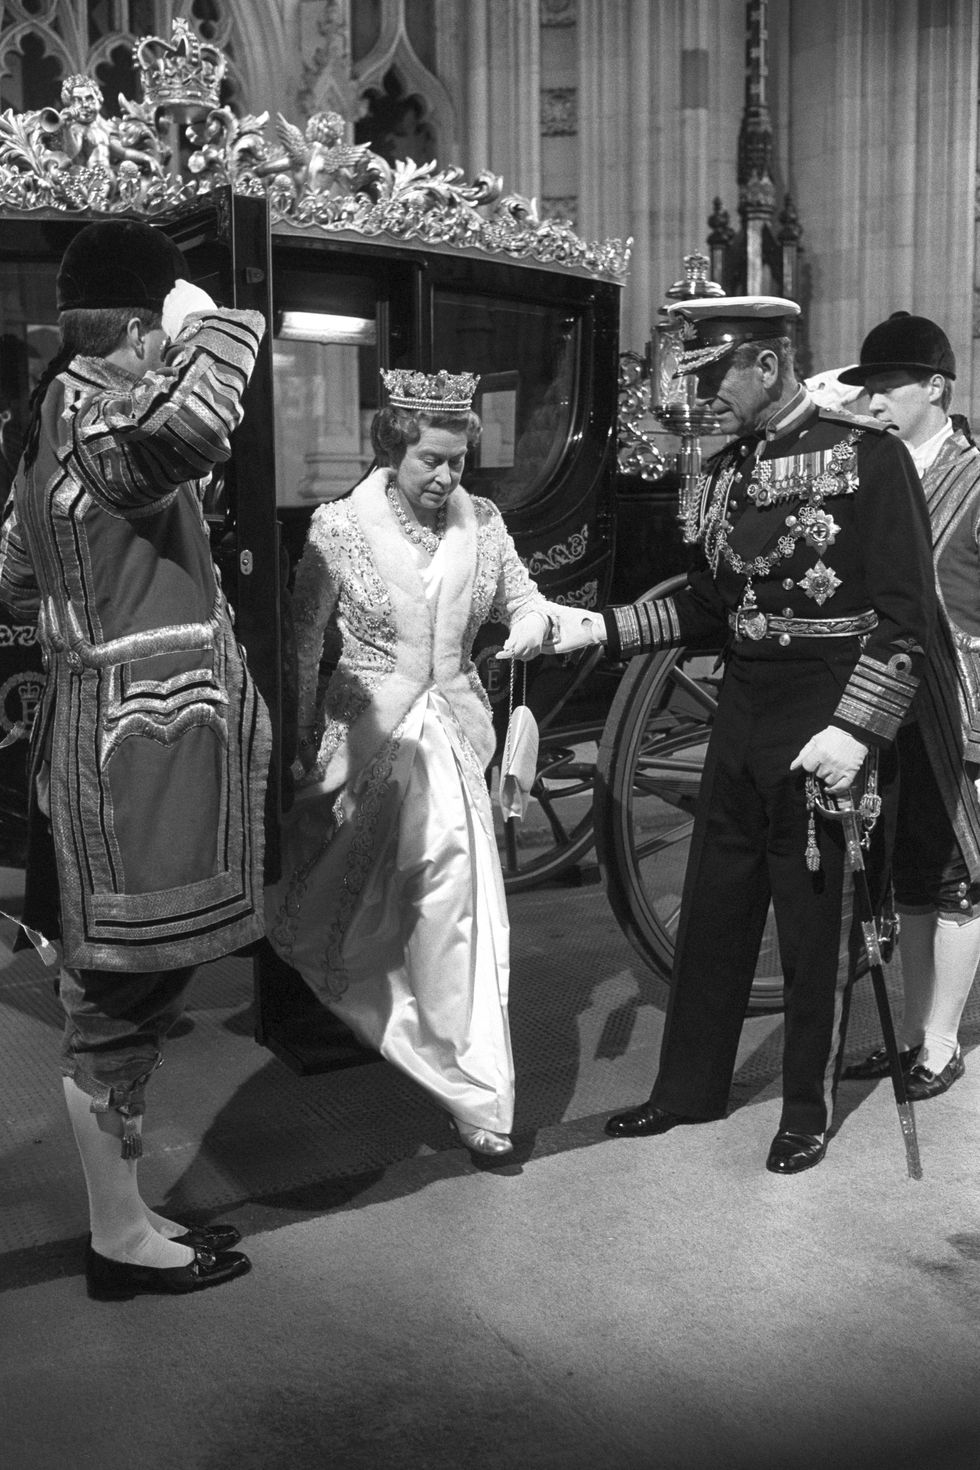 Seventy photos for 70 years of the Queen’s record-breaking reign